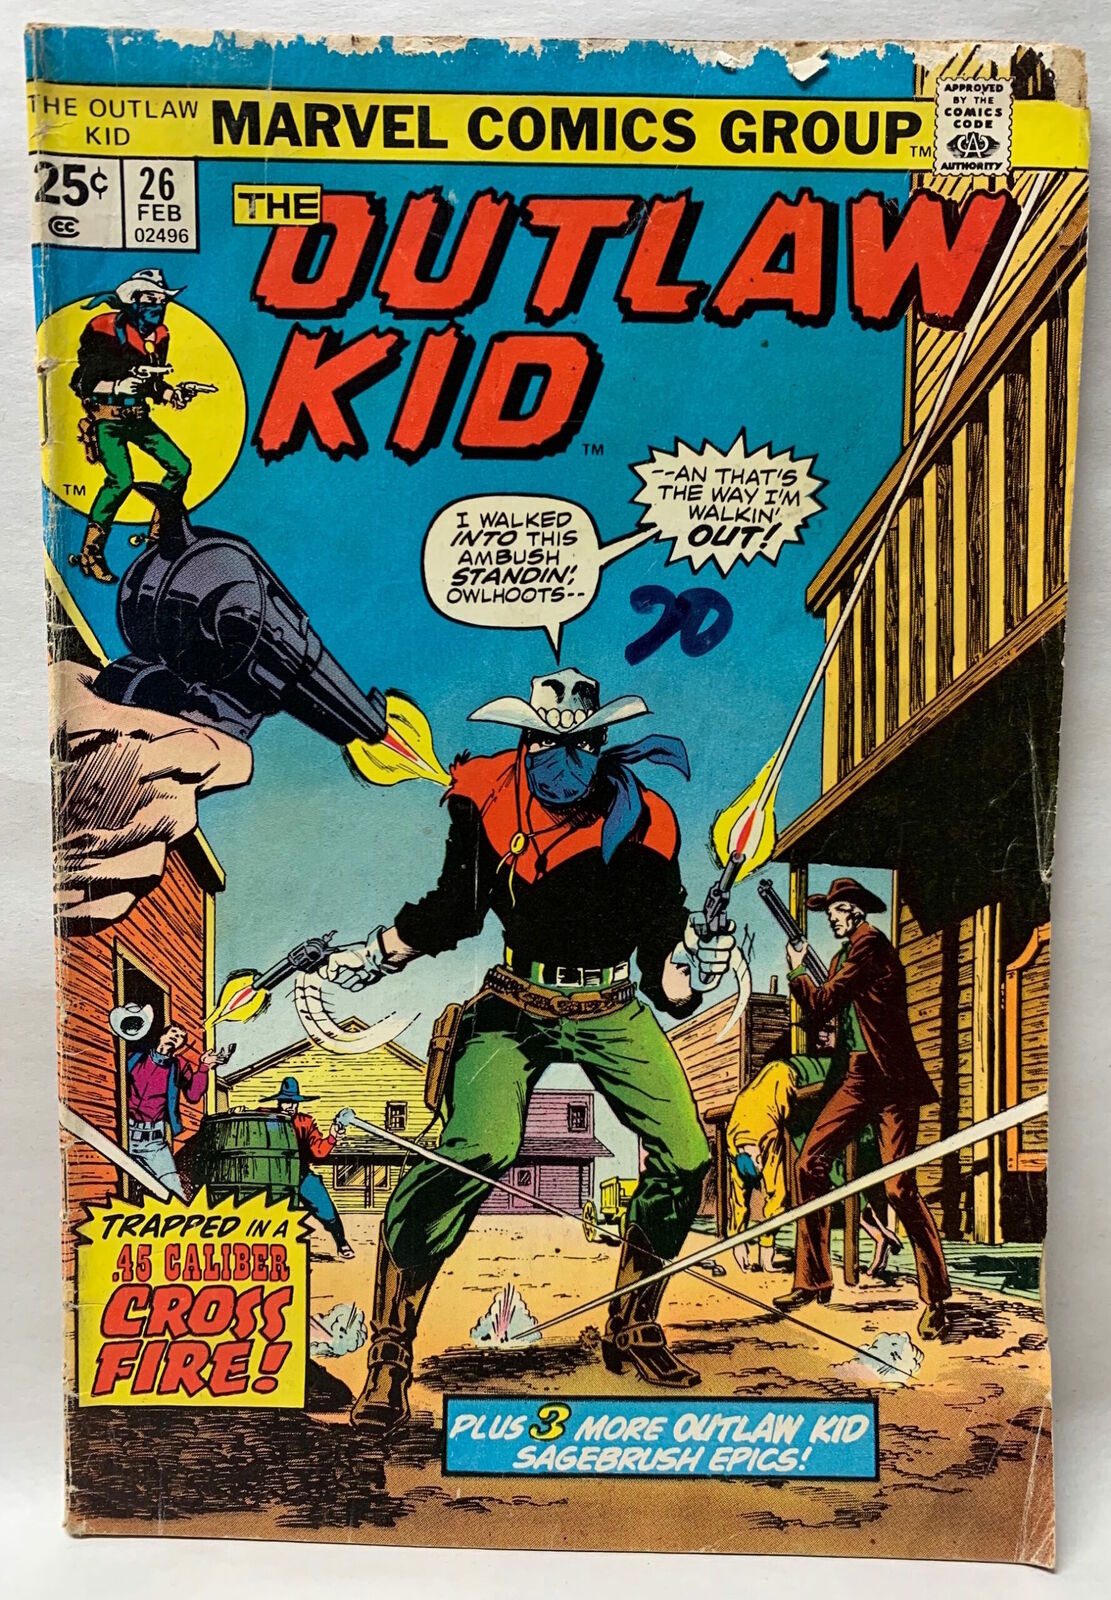 COMIC BOOK ~ THE OUTLAW KID #26